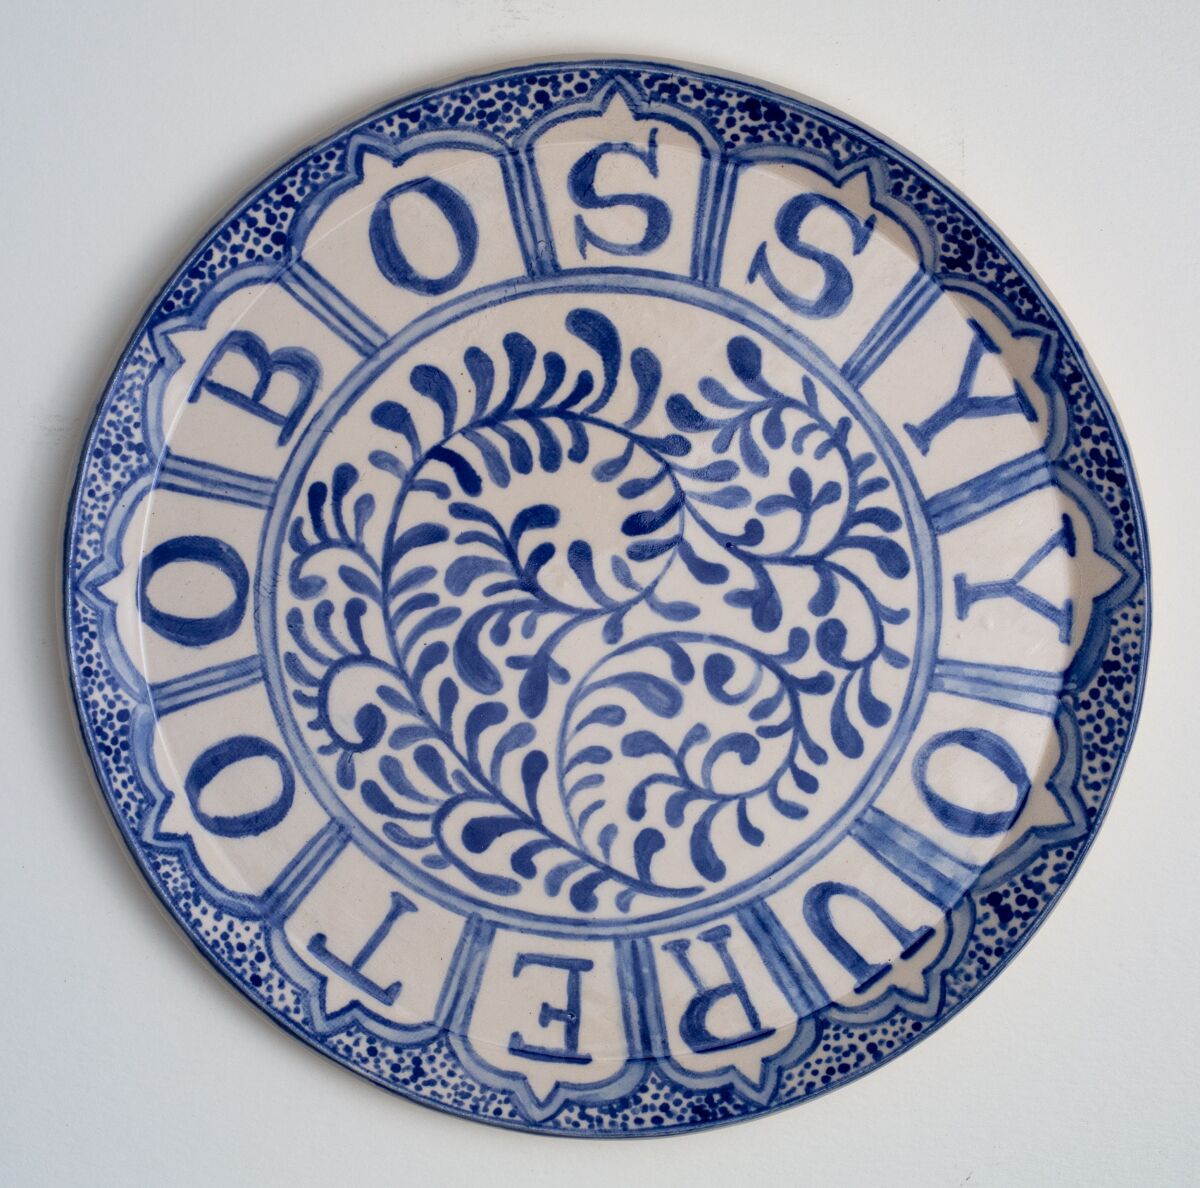 "You're Too Bossy" by Elyse Pignolet, 2019. Ceramic plate with glazes, on view at Track 16.